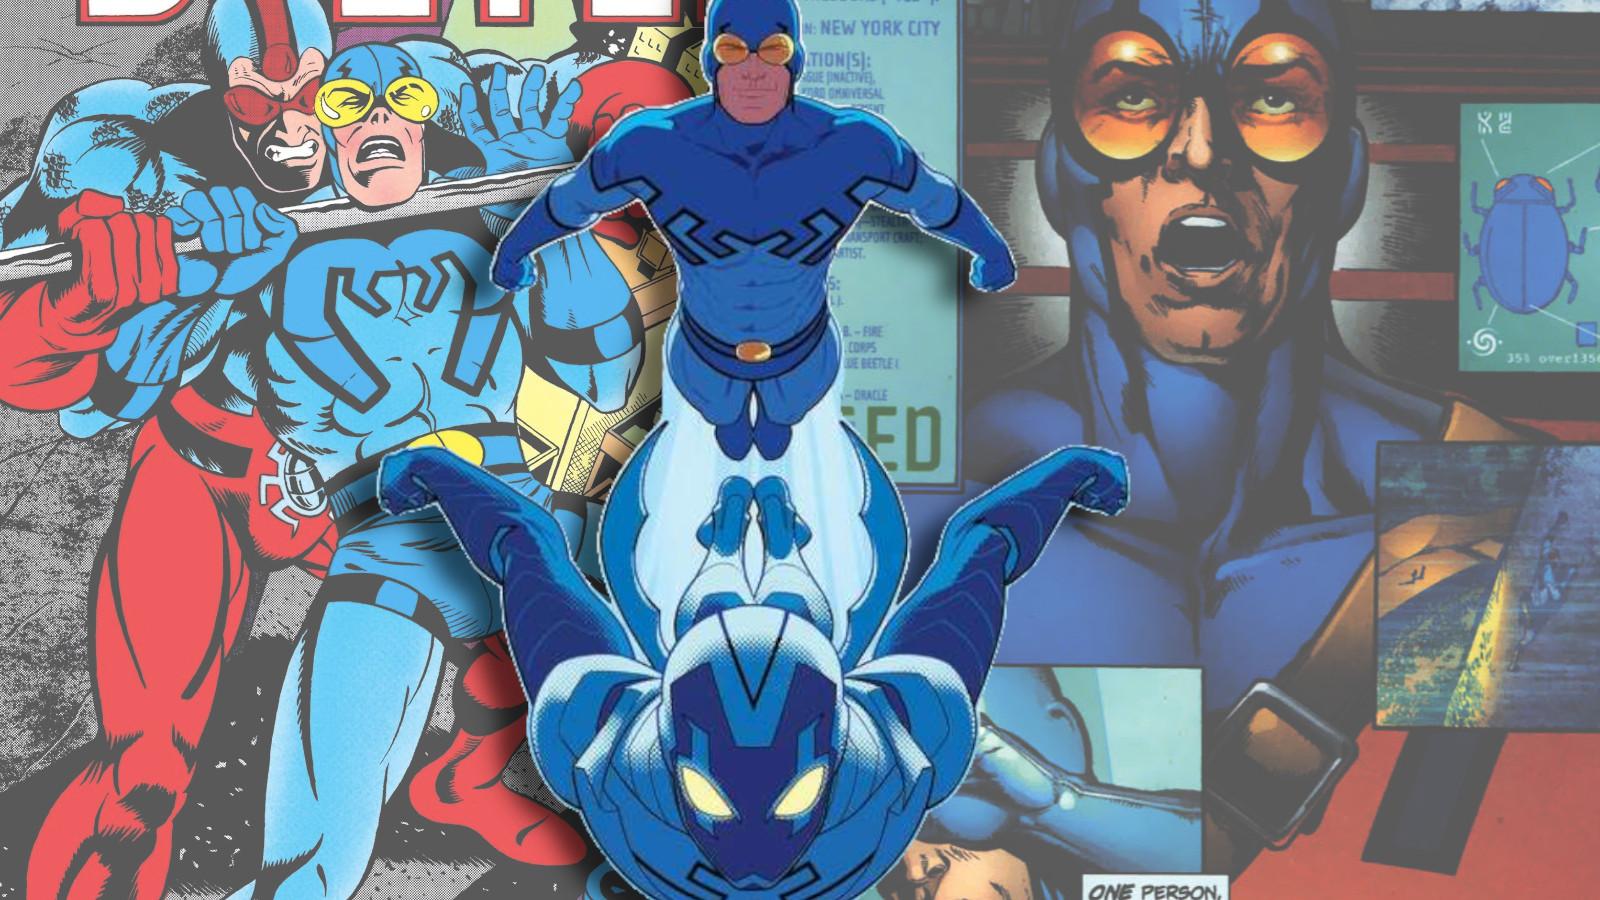 Blue Beetle is getting an ongoing DC comic book to debut alongside Jaime  Reyes' new movie